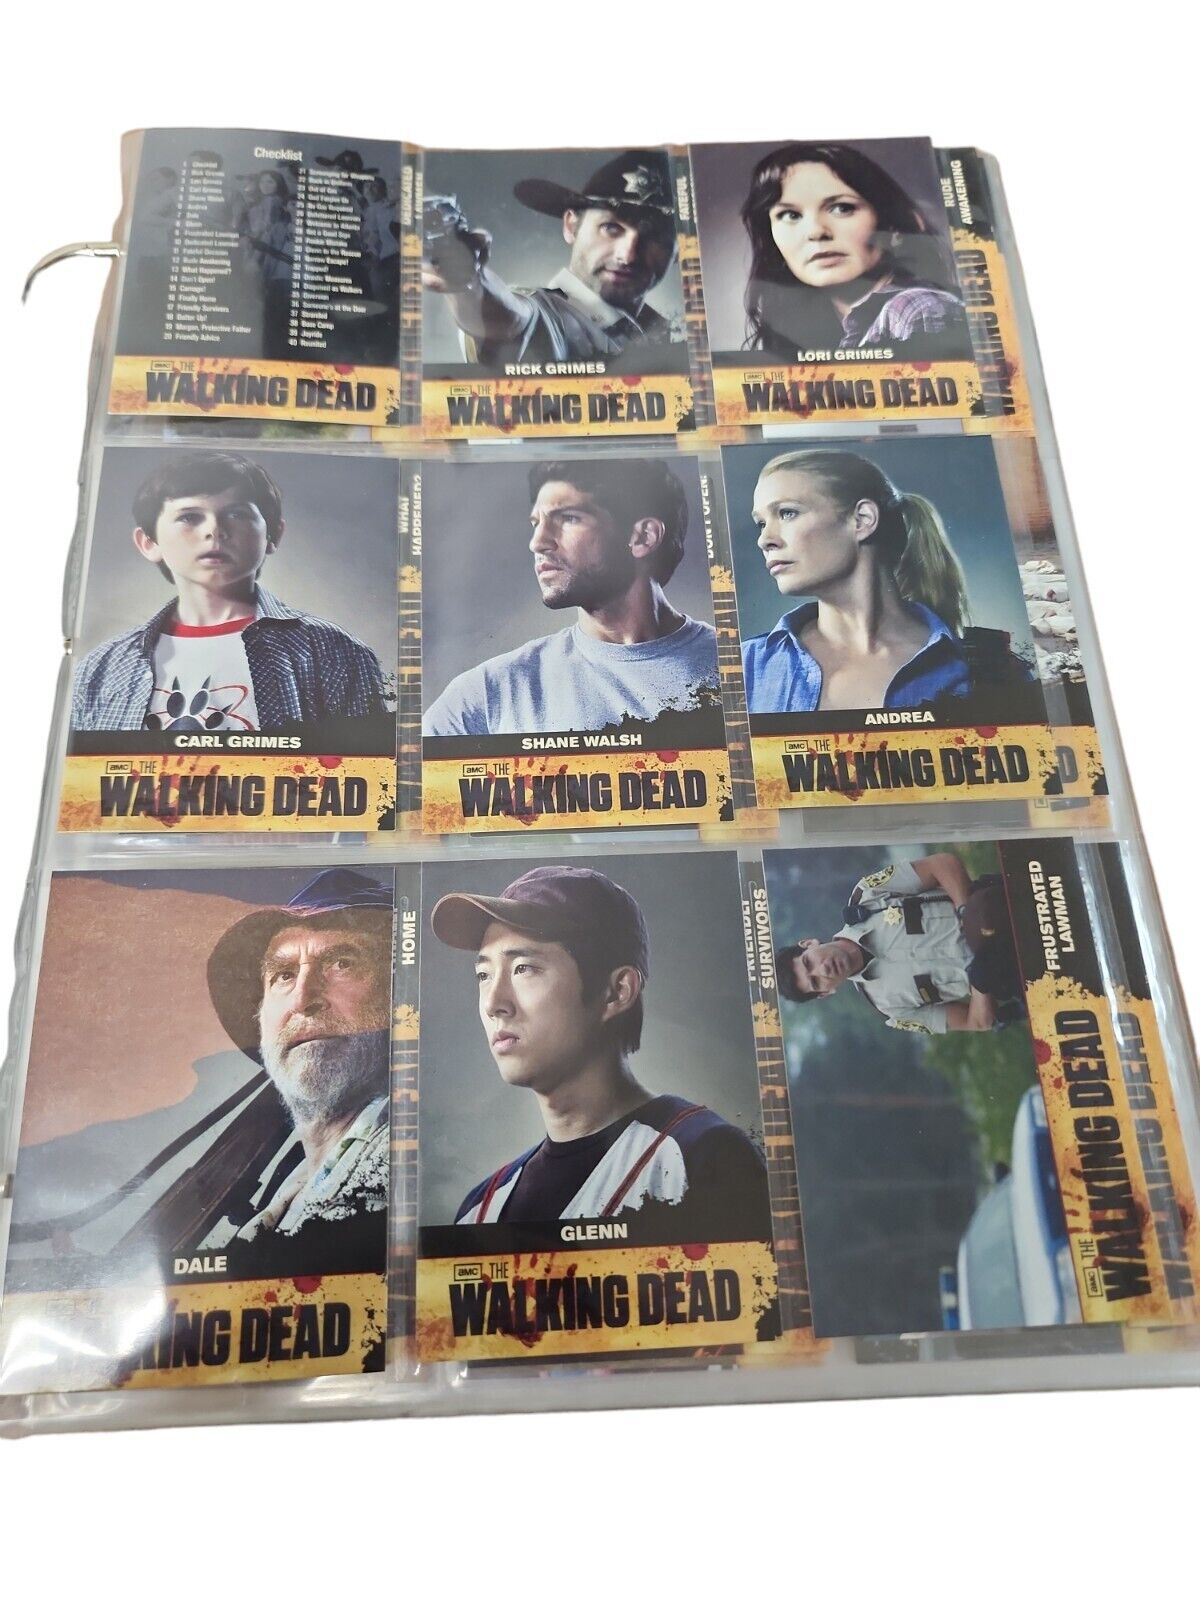 The Walking Dead Season 1-4 Cryptozpic Card Set Complete Additional Topps Set